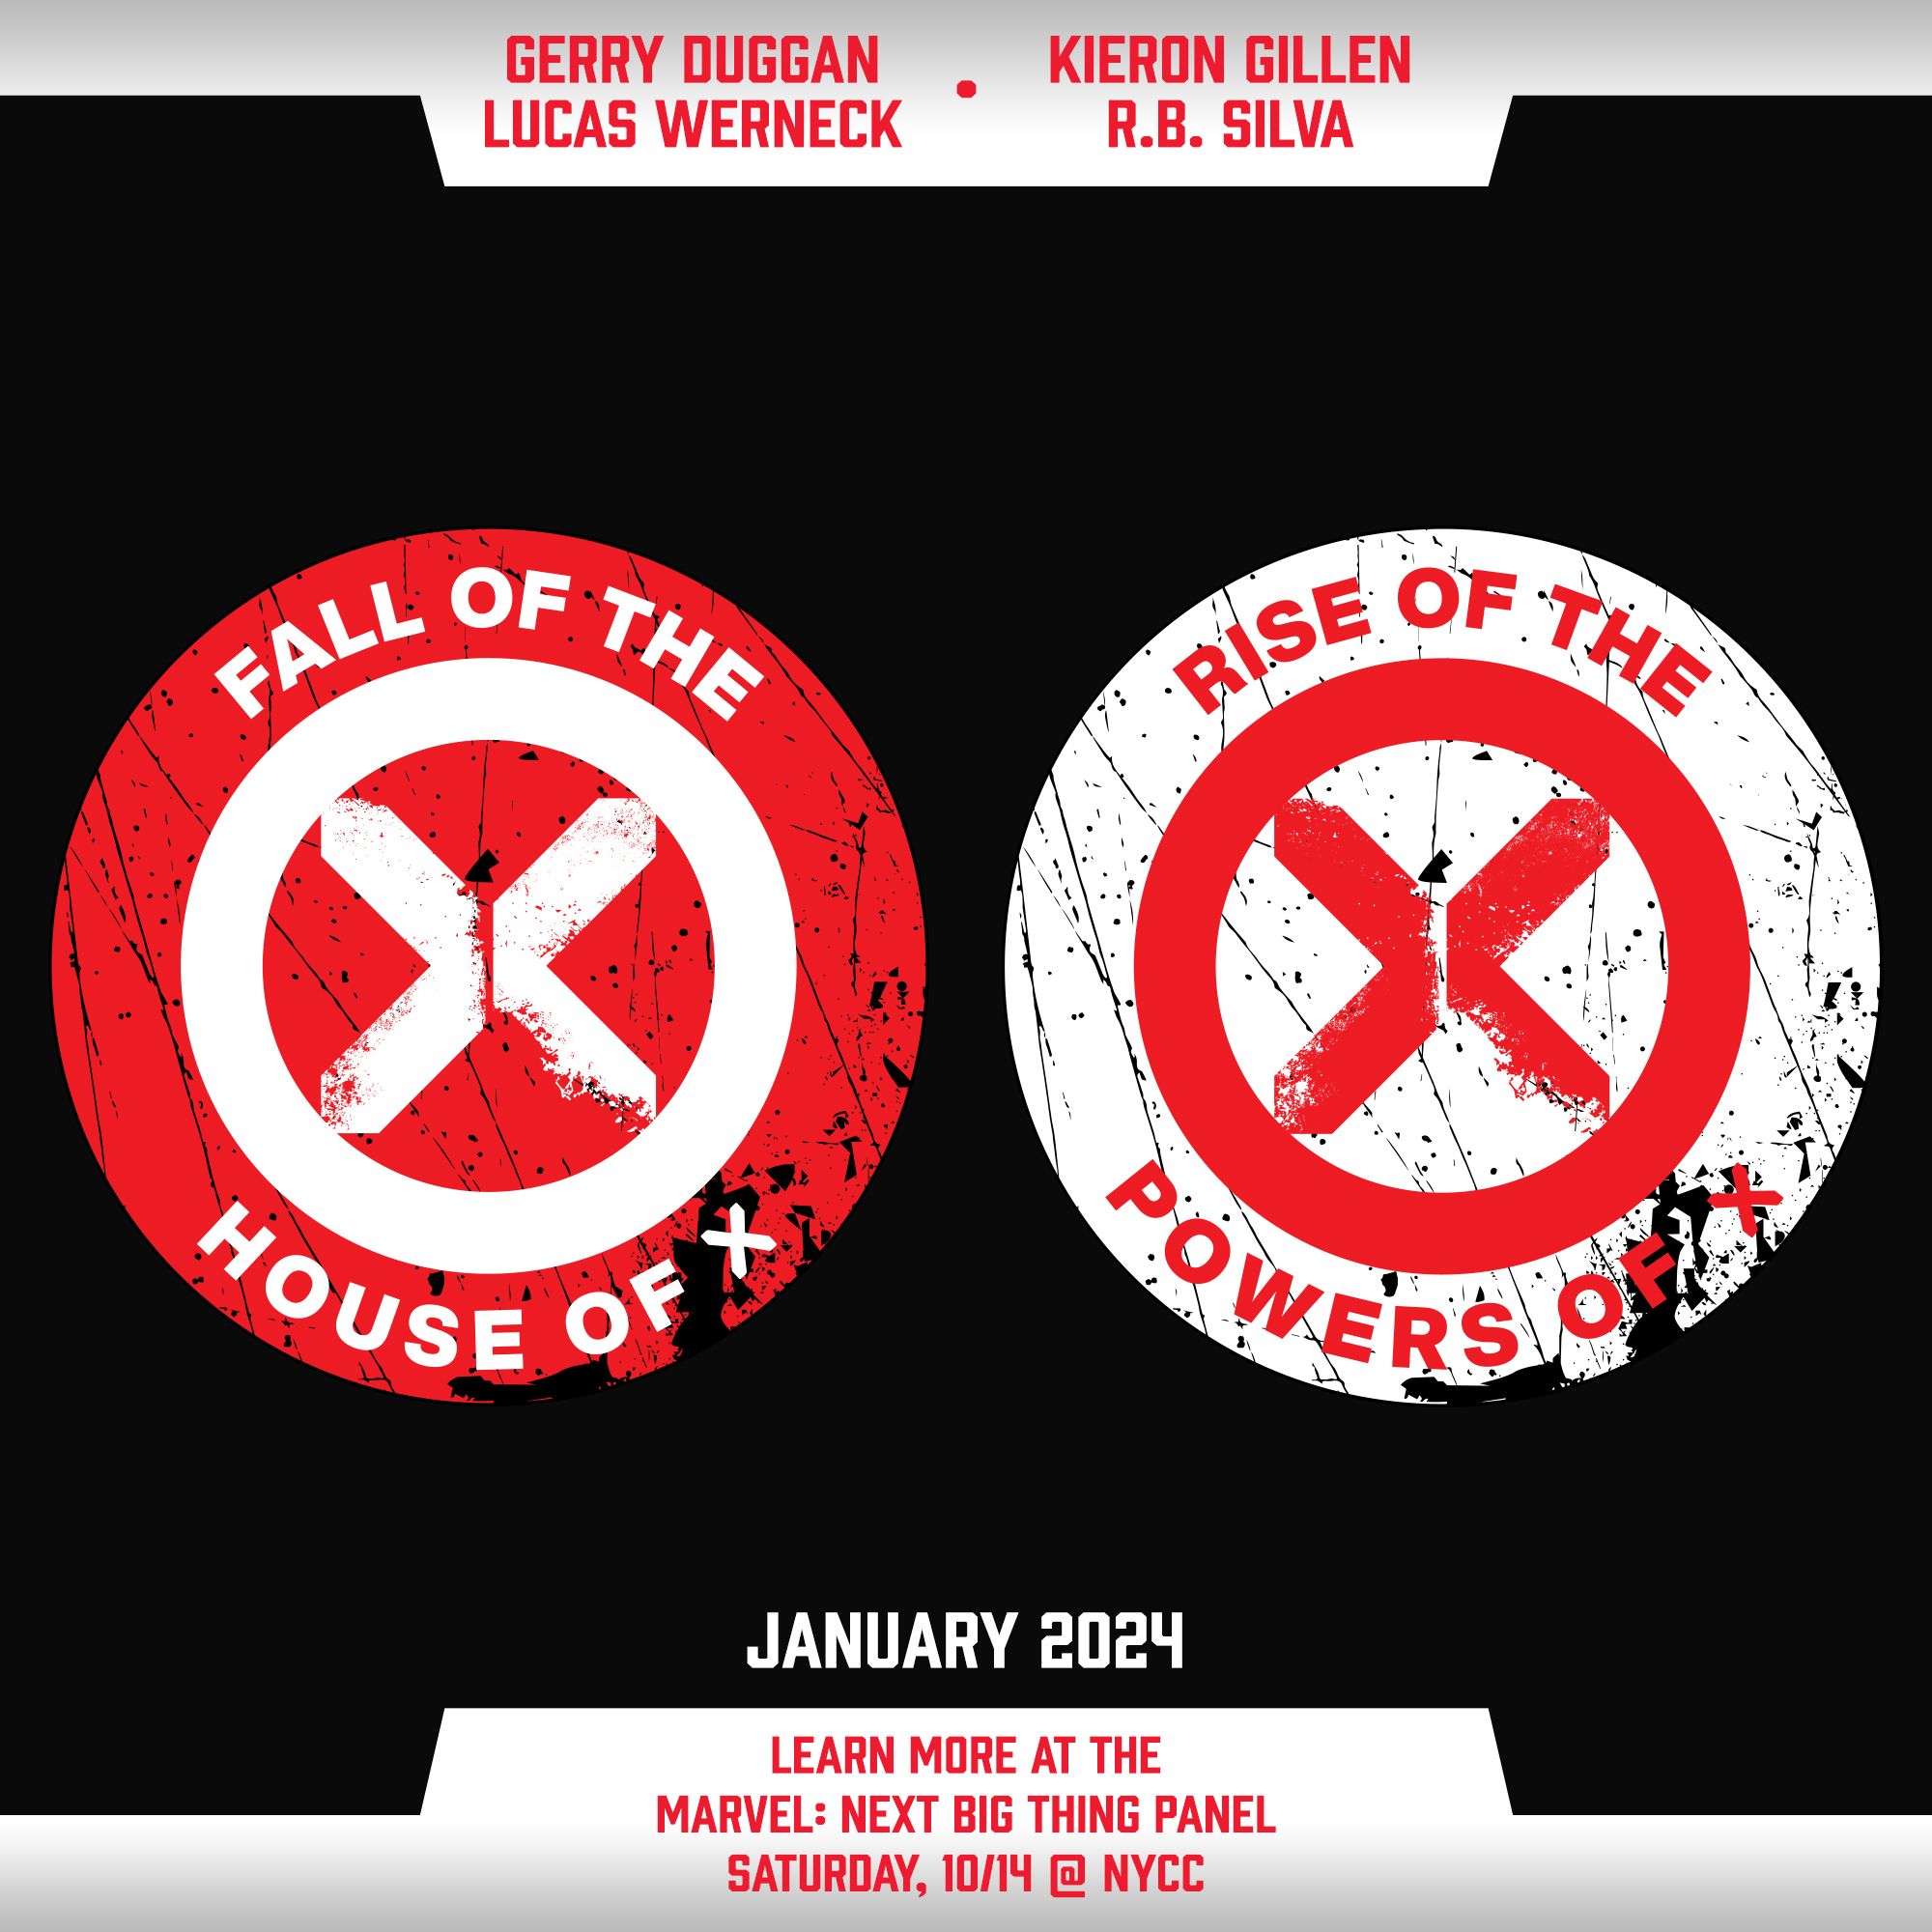 The teaser for the fall of the House of X and the rise of the Powers of X